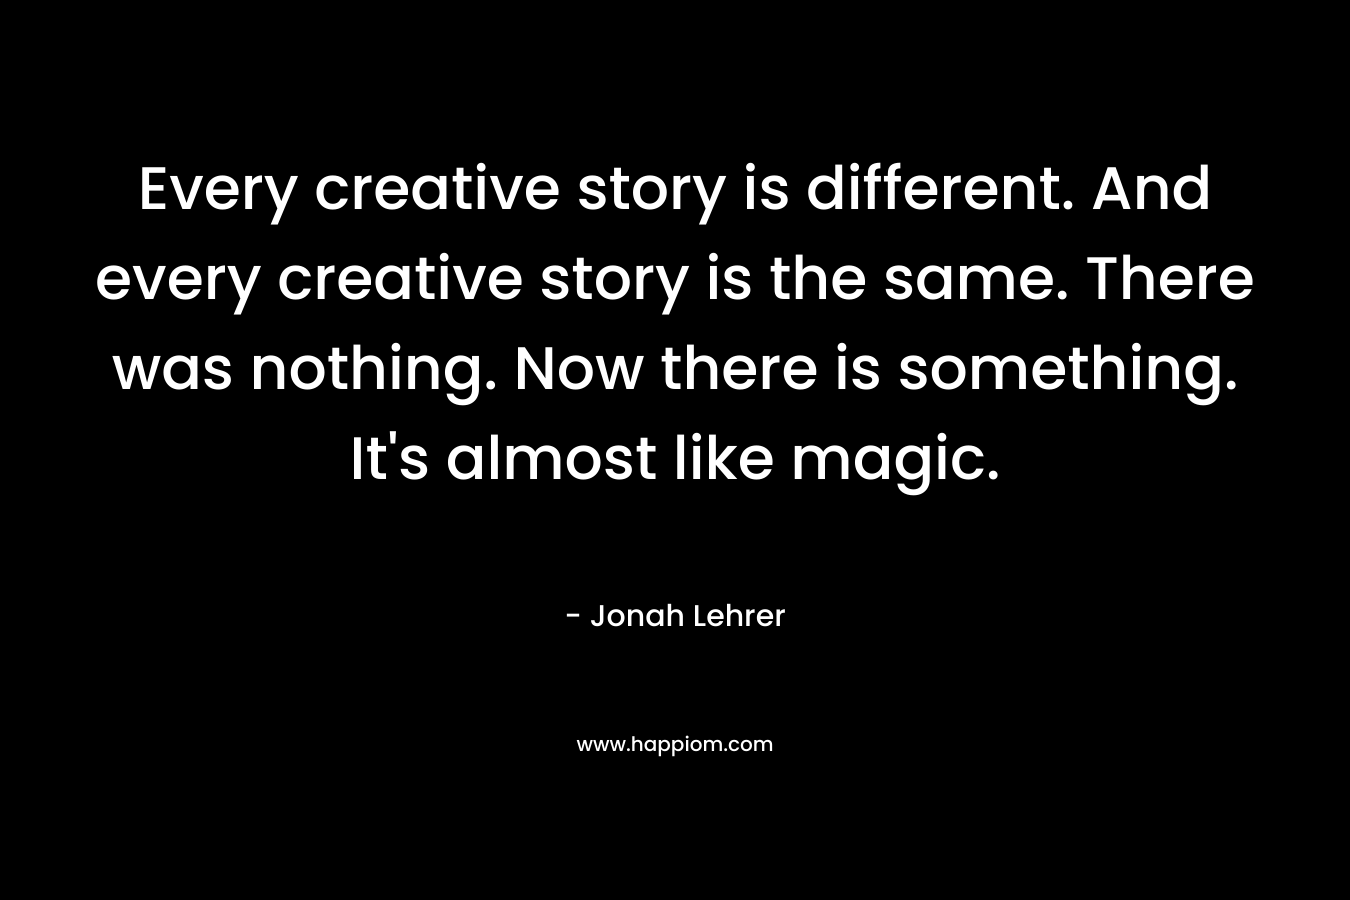 Every creative story is different. And every creative story is the same. There was nothing. Now there is something. It’s almost like magic. – Jonah Lehrer